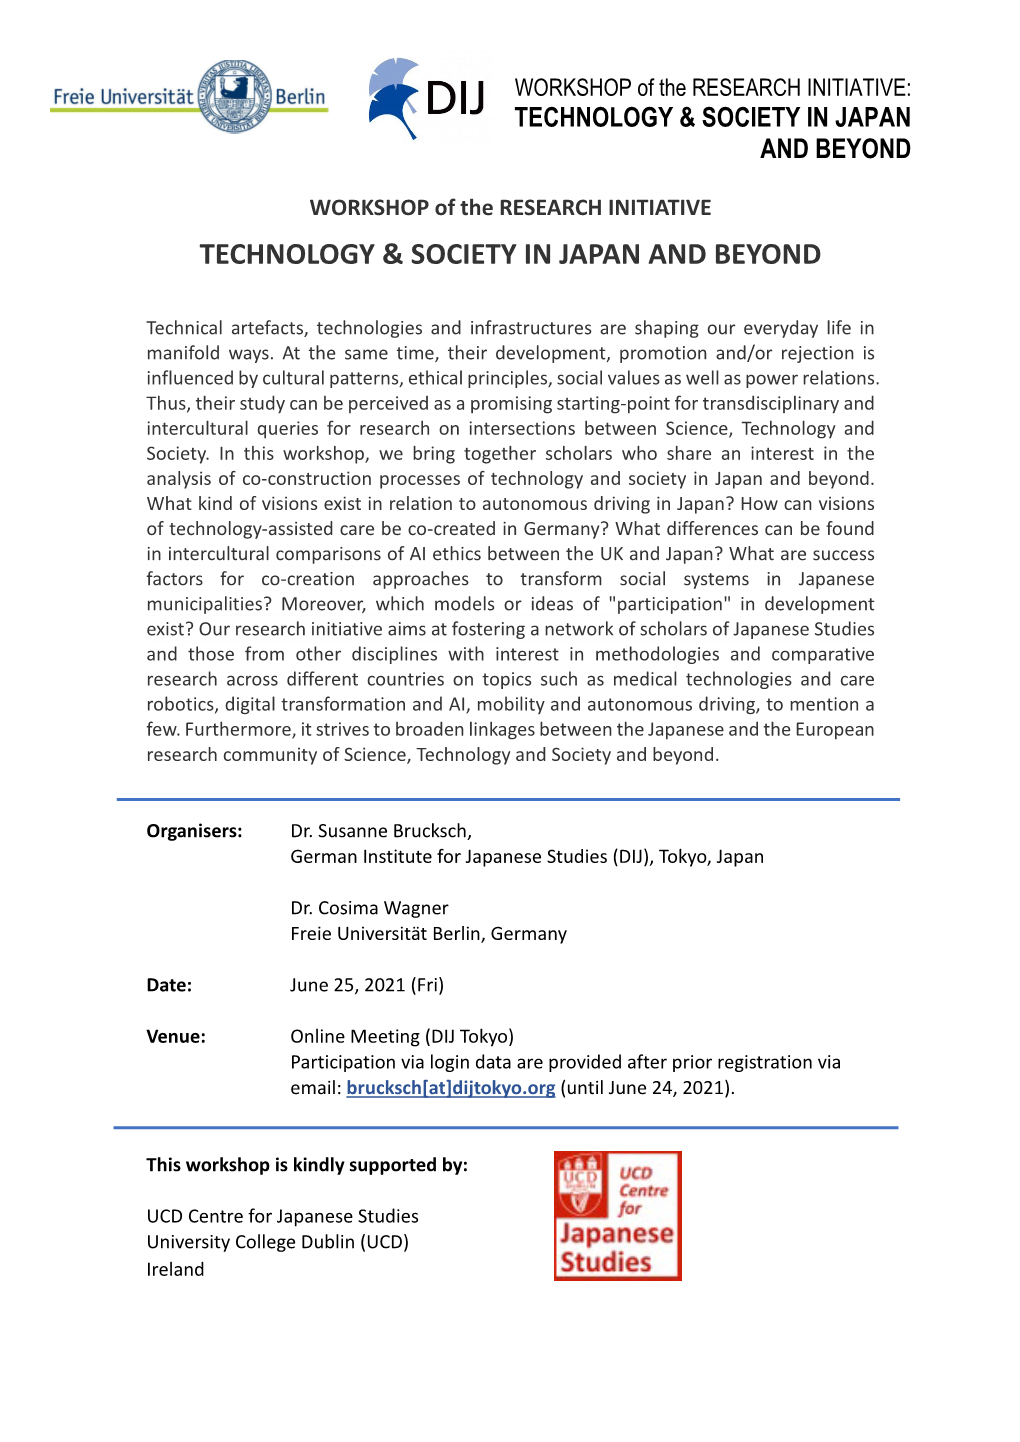 Technology & Society in Japan and Beyond